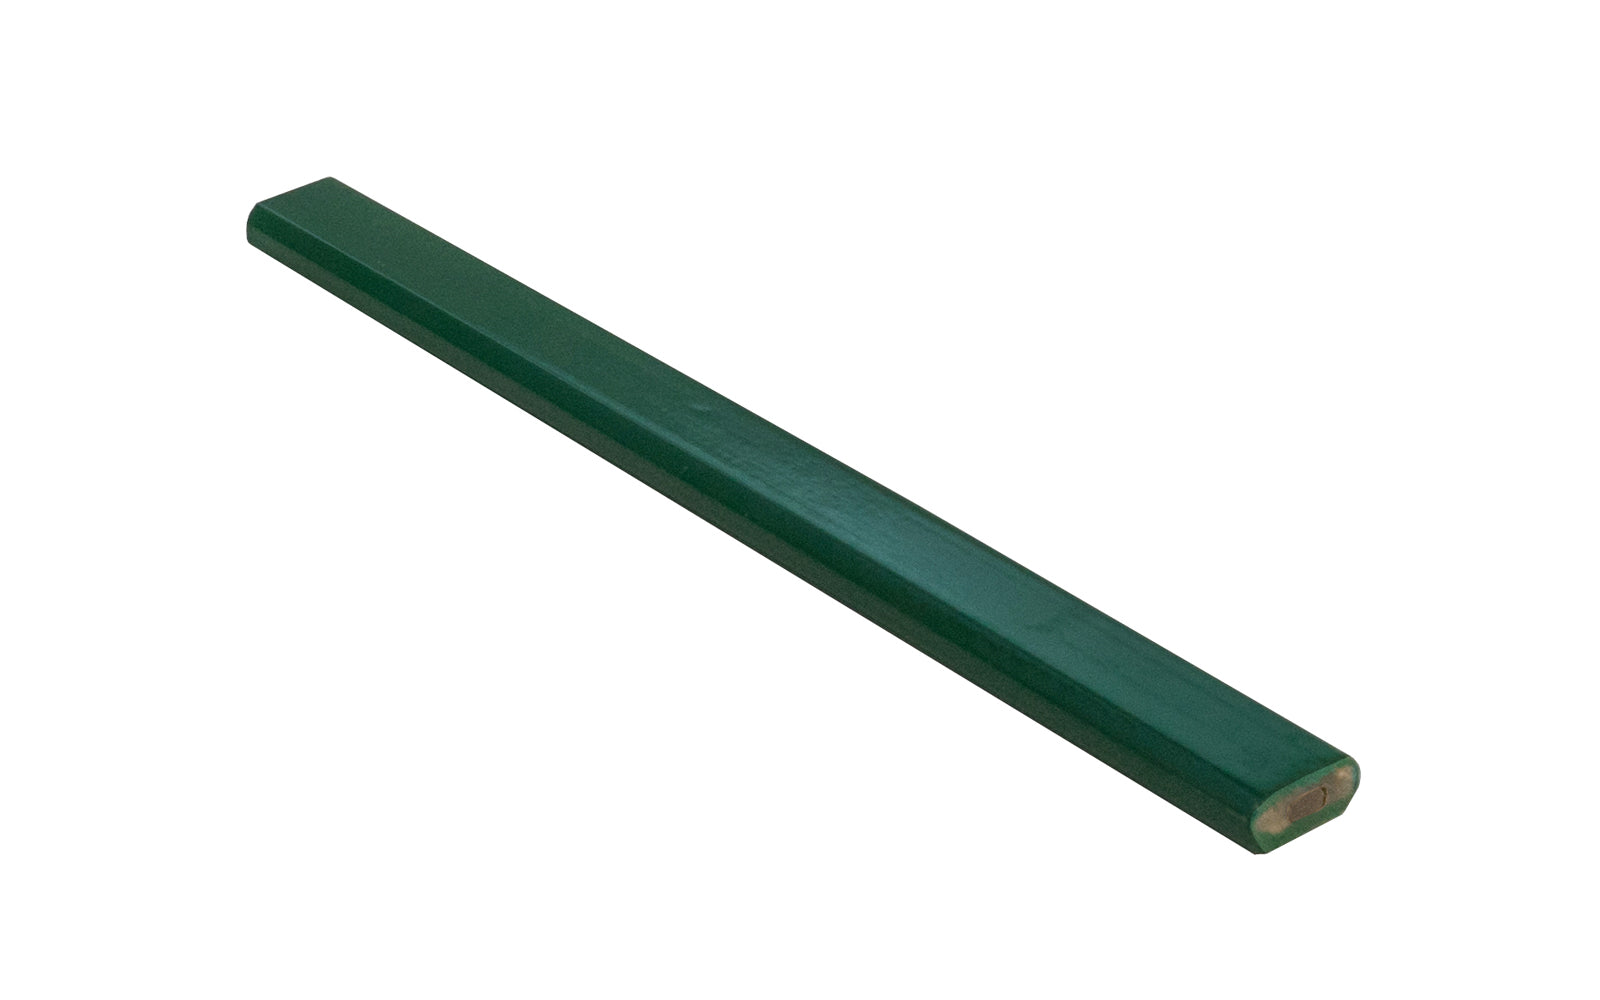 This Green color Carpenter's Pencil is designed for drawing out visible lines, marking drill holes, measurements, & good for other construction needs. It has broad point type with #2 hard pencil lead. Great for coarse lines on rough surfaces. Wide hex shape prevents pencil from rolling. Graphite Construction Pencil.